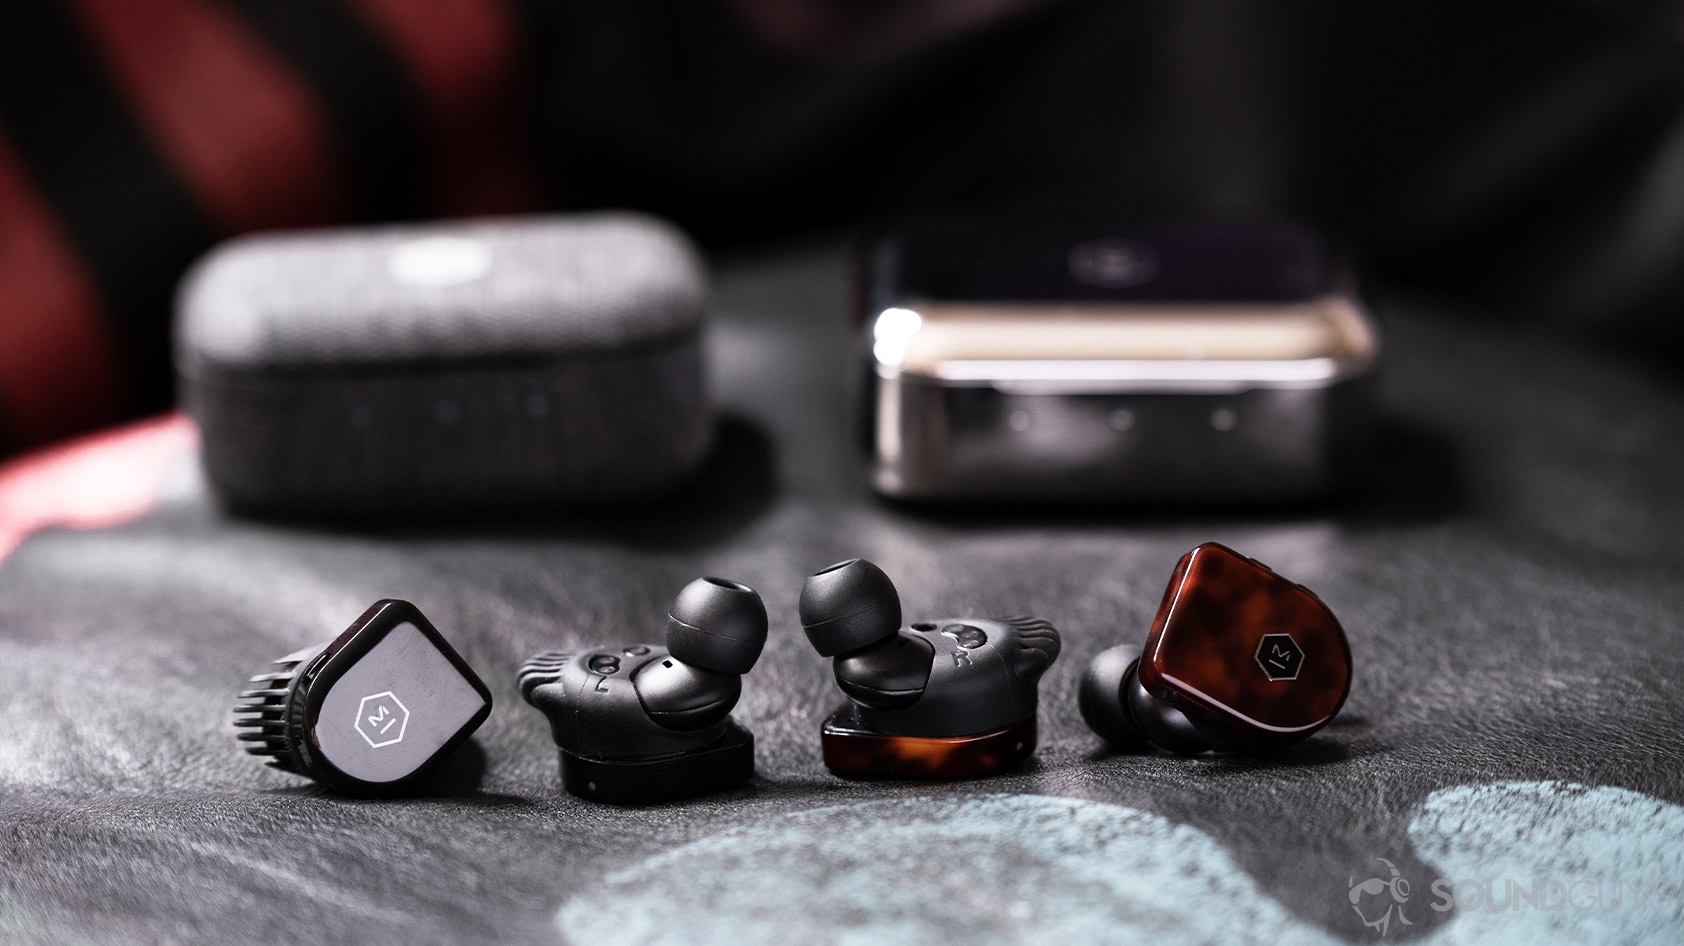 A picture of the Master &amp; Dynamic MW07 Plus and MW07 Go noise canceling true wireless earbuds and charging cases next to each other on a leather surface.